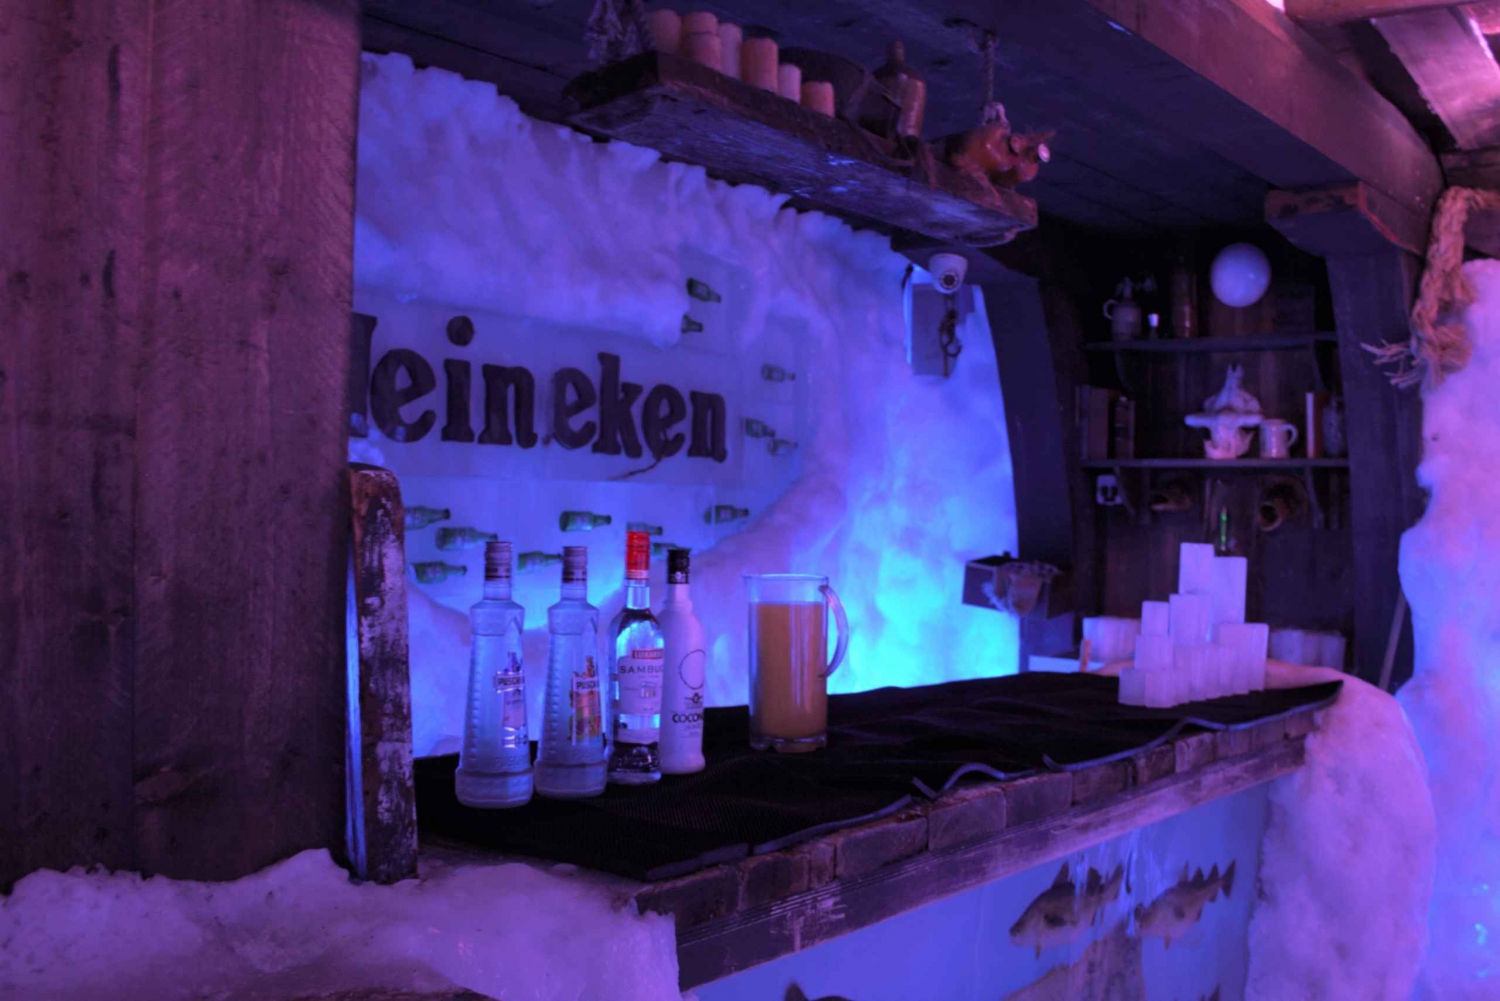 Amsterdam: Escape Club and Icebar Entry Tickets with Drinks